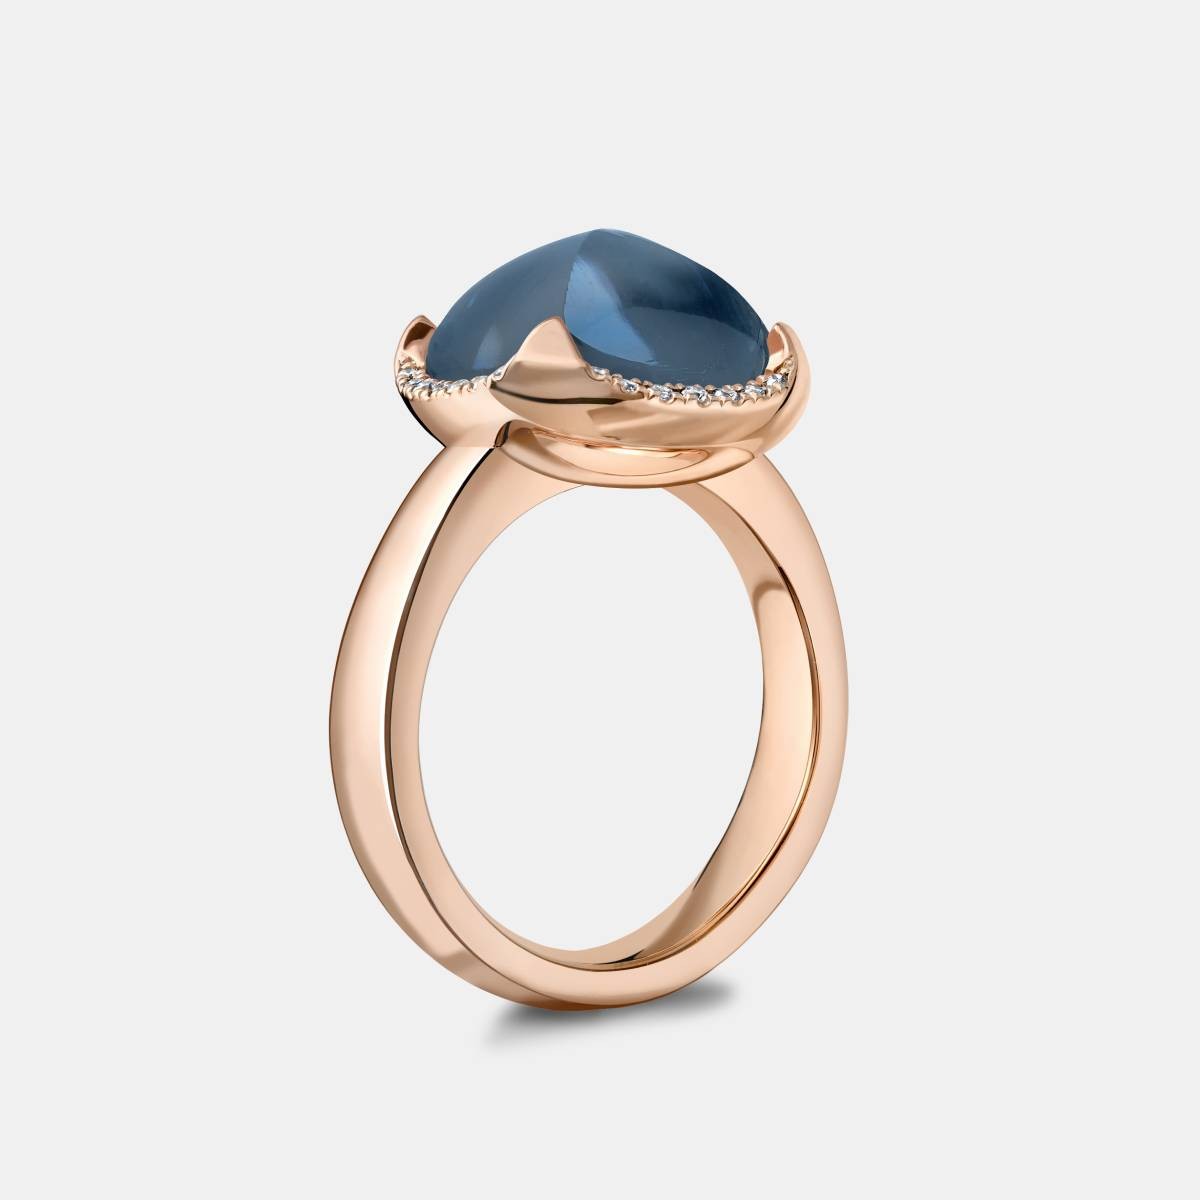 The Rose Gold and London Blue Topaz Pyramid Ring